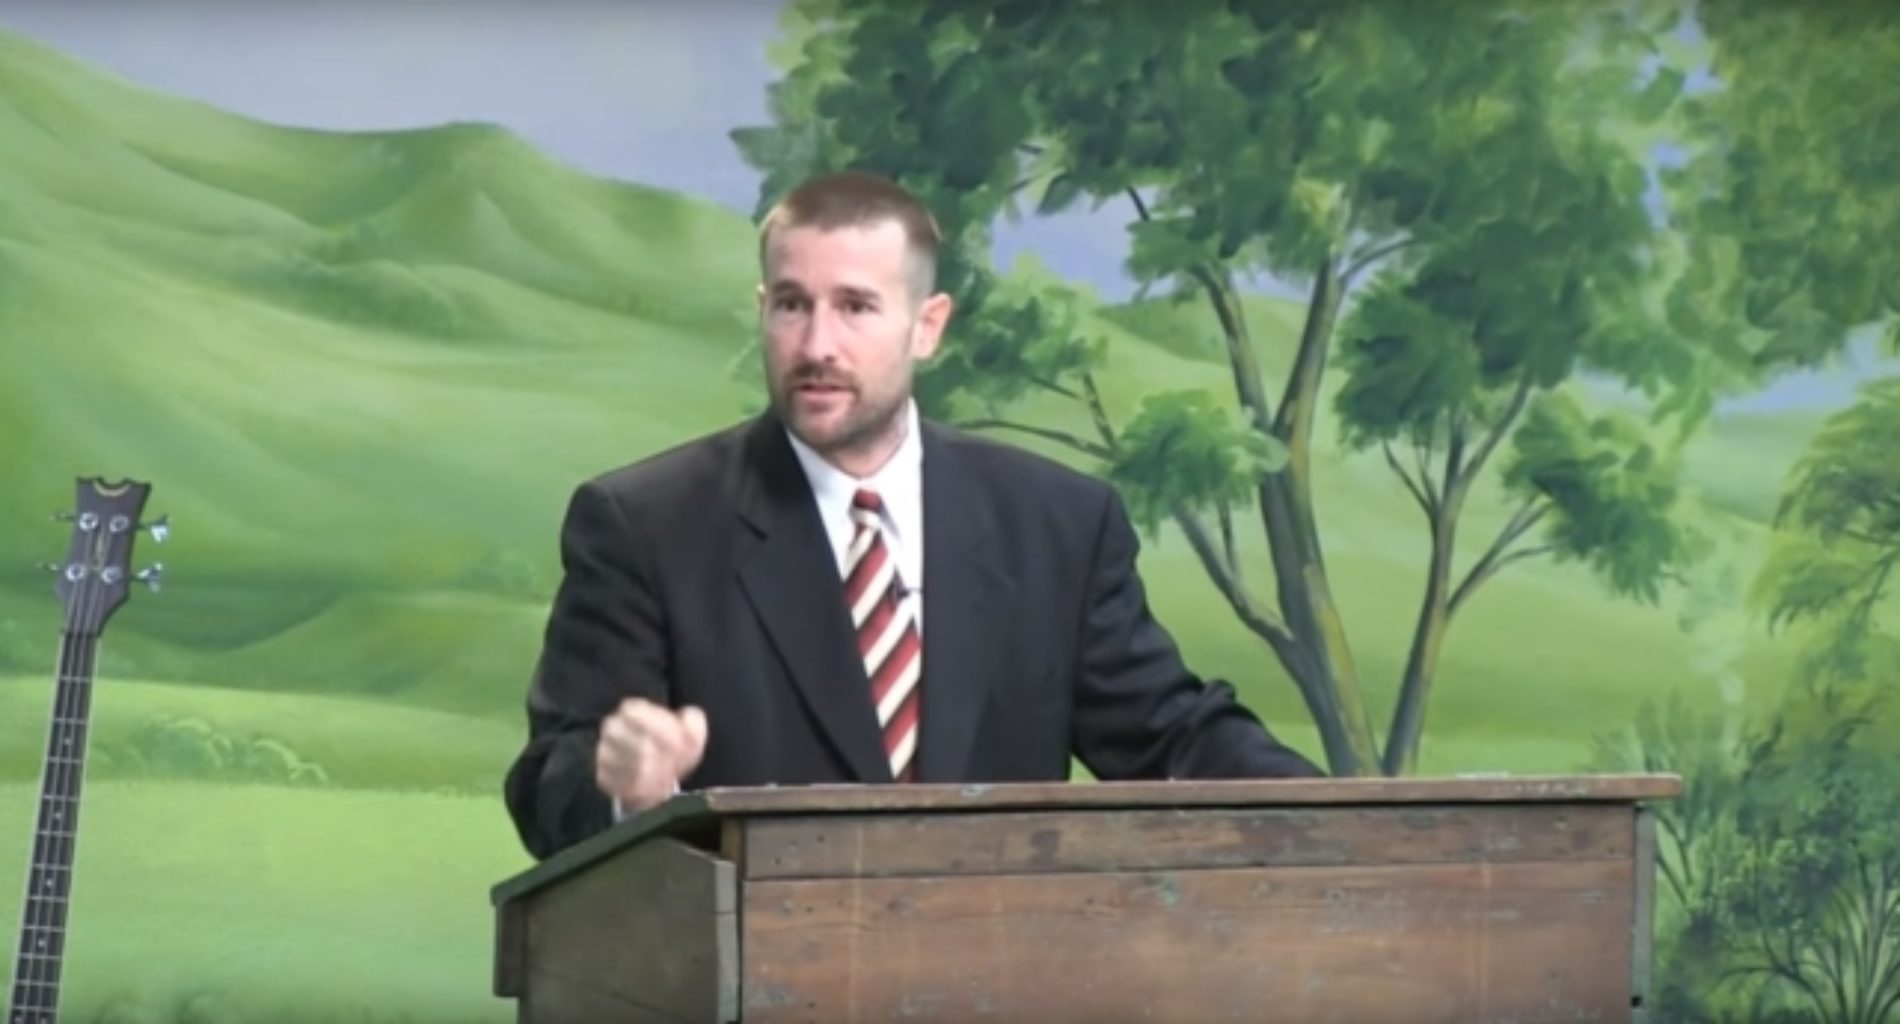 South African churches snub visit from US homophobic pastor, Steven Anderson